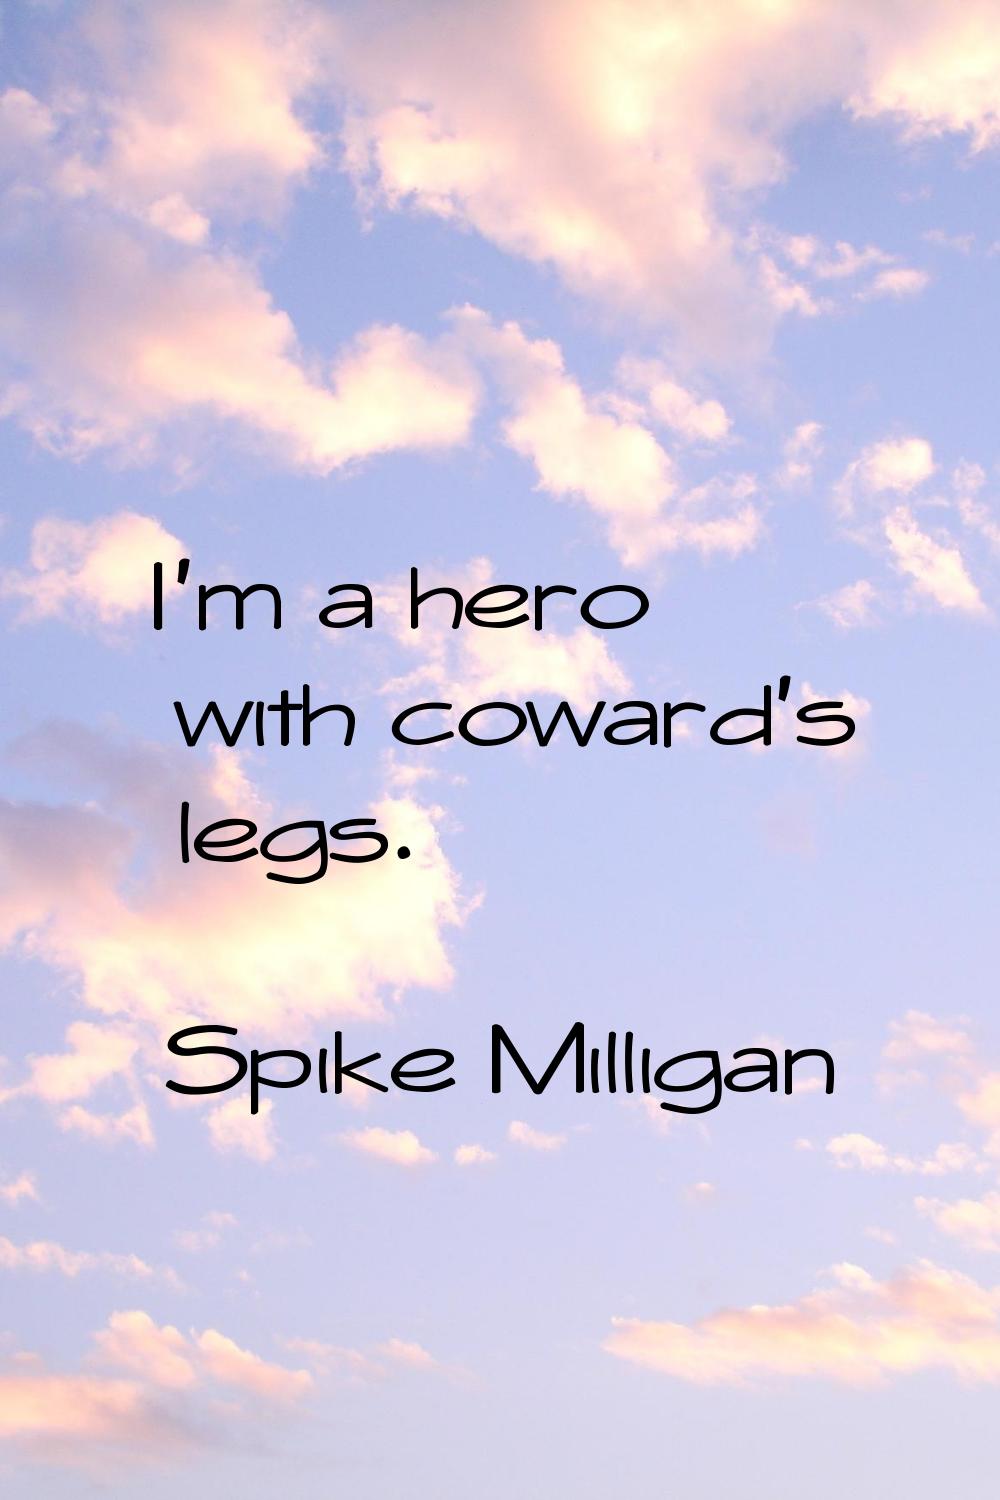 I'm a hero with coward's legs.